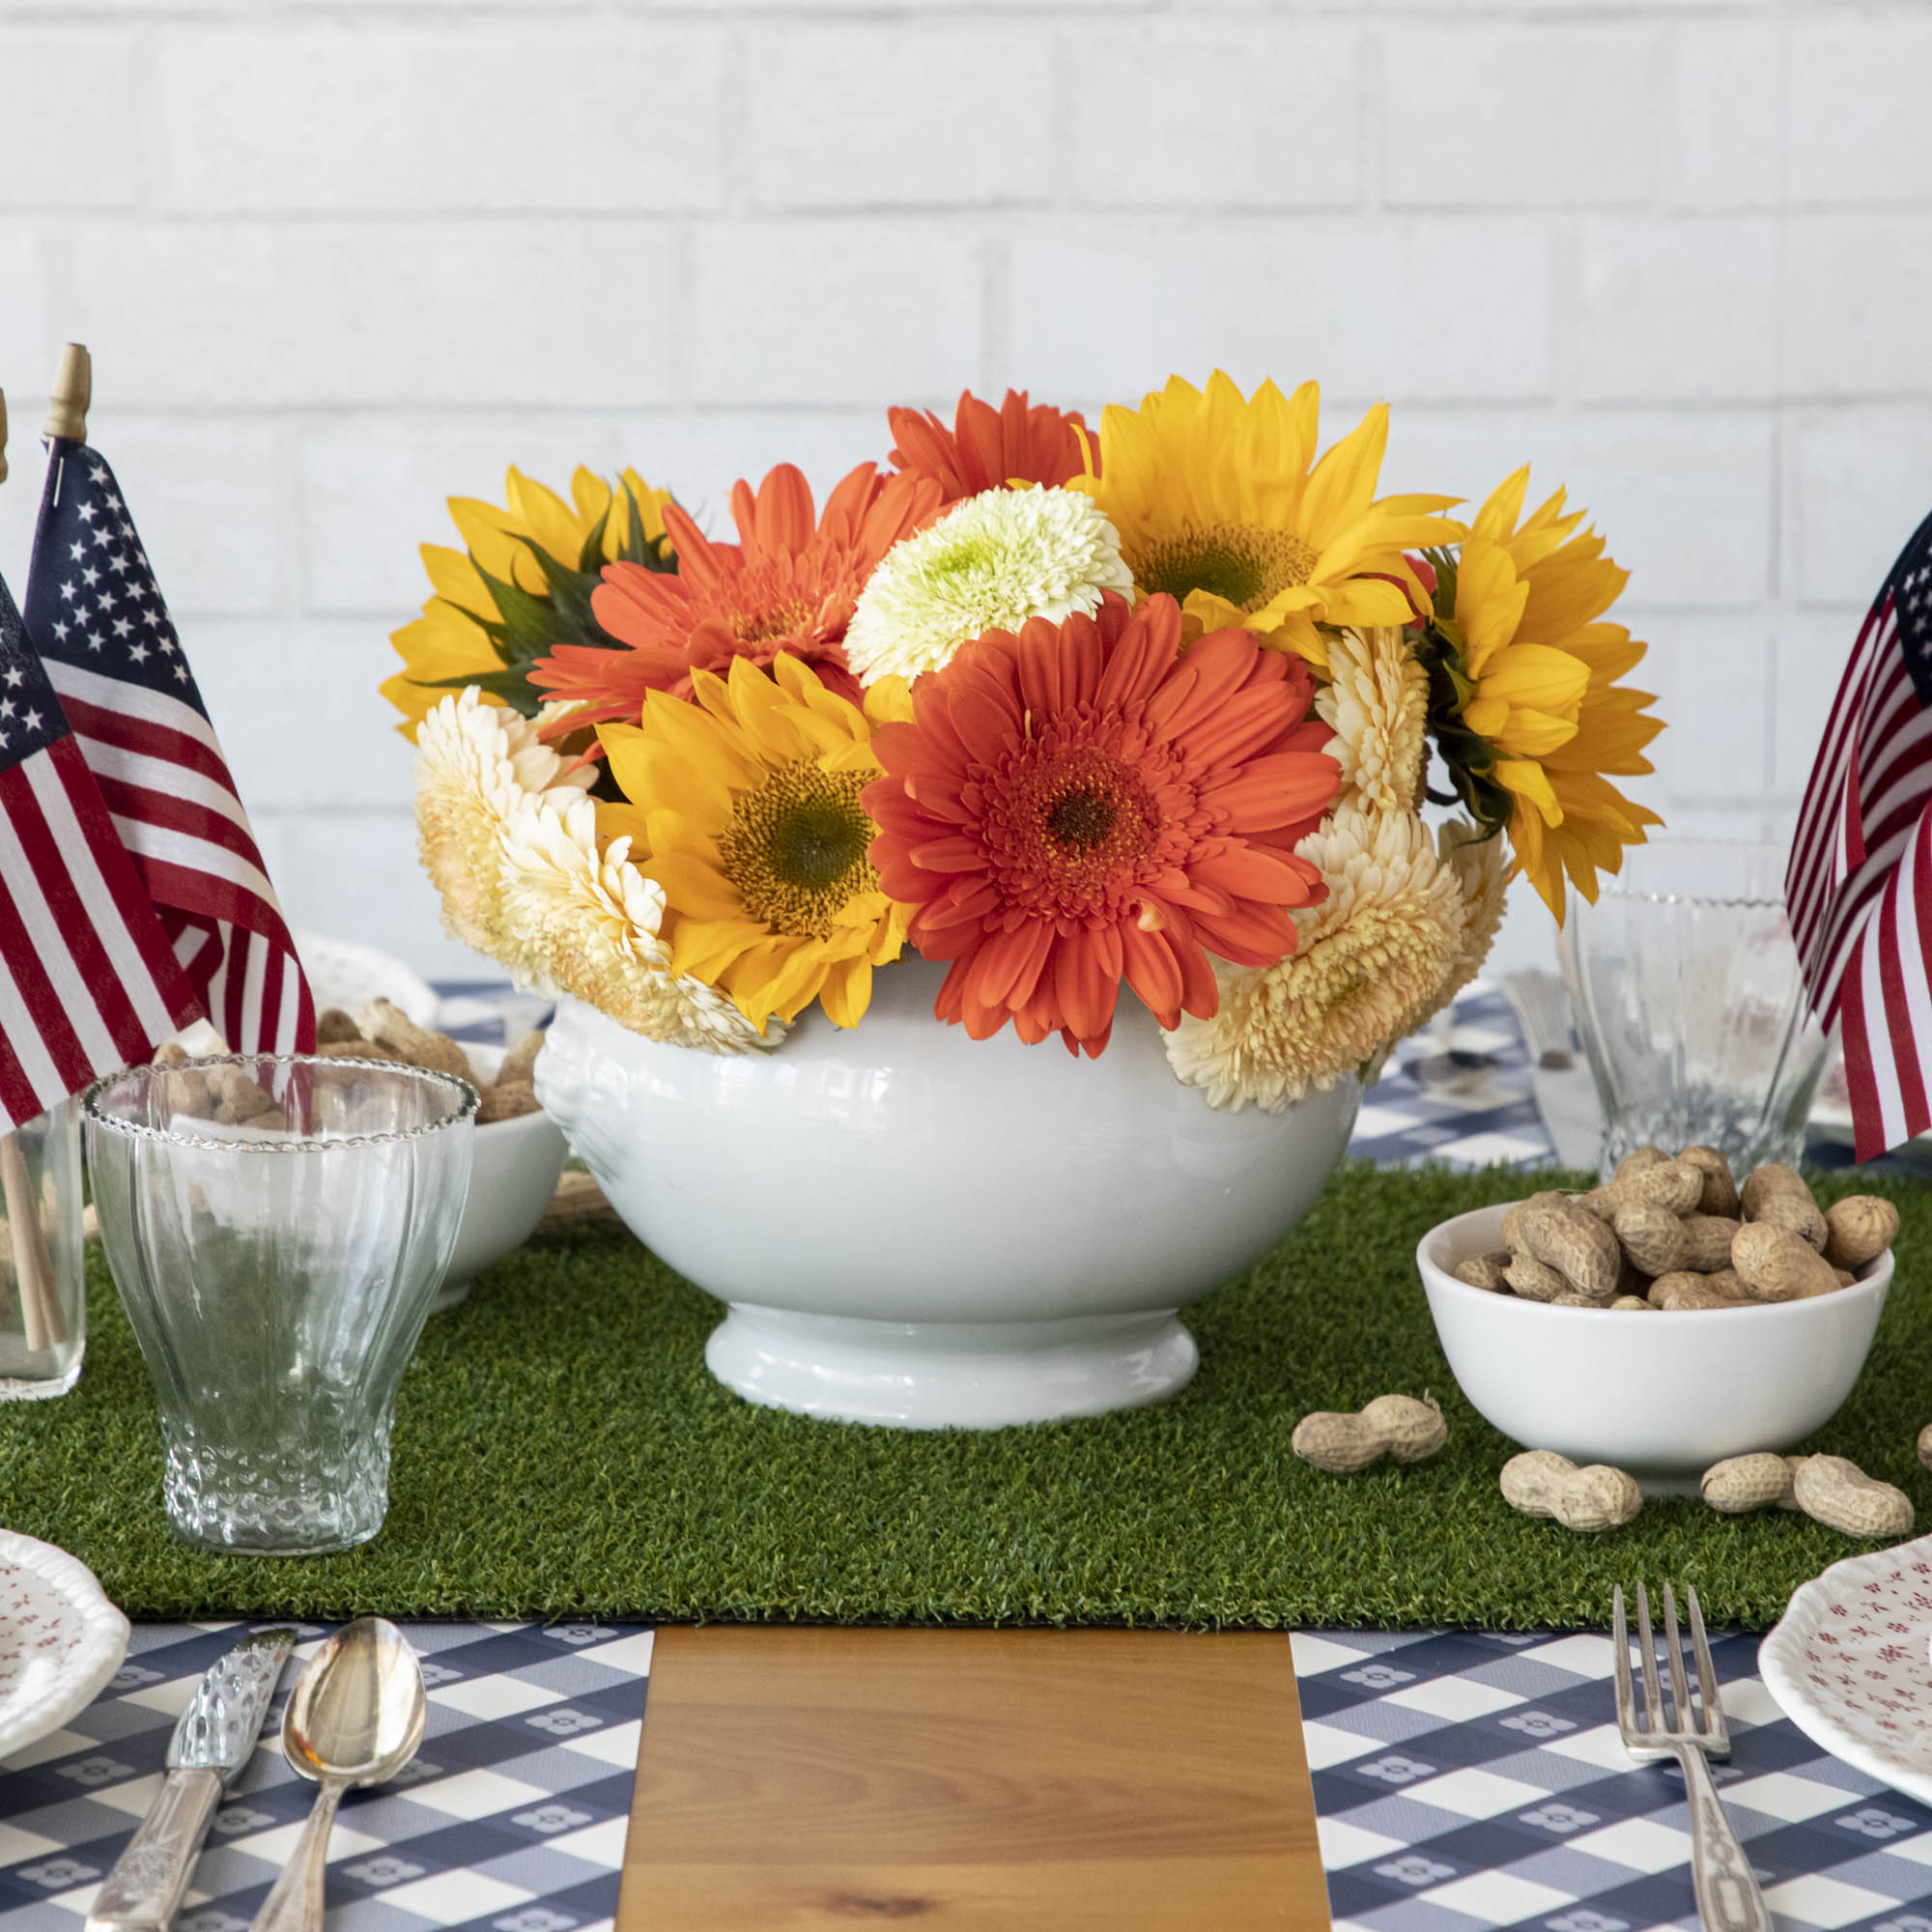 A patriotic table setting adorned with American flags and flowers, enhanced by a Talking Tables Artificial Grass Table Runner for a festive party atmosphere.